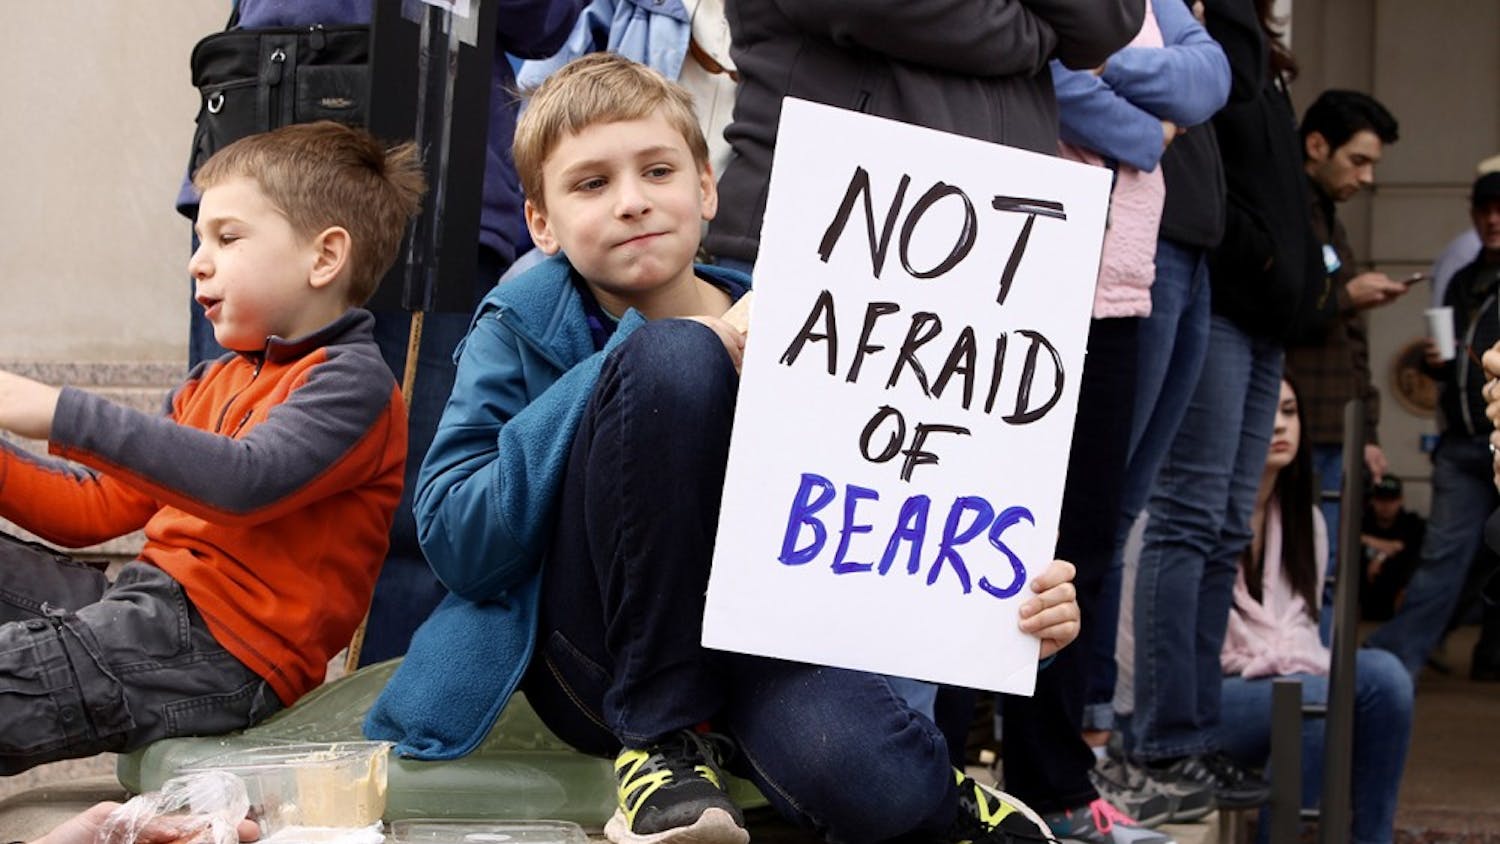 A boy holds a sign referencing a comment made by Betsy Devos, President Trump's pick for education secretary. DeVos said school teachers should be armed to protect children from grizzly bears.